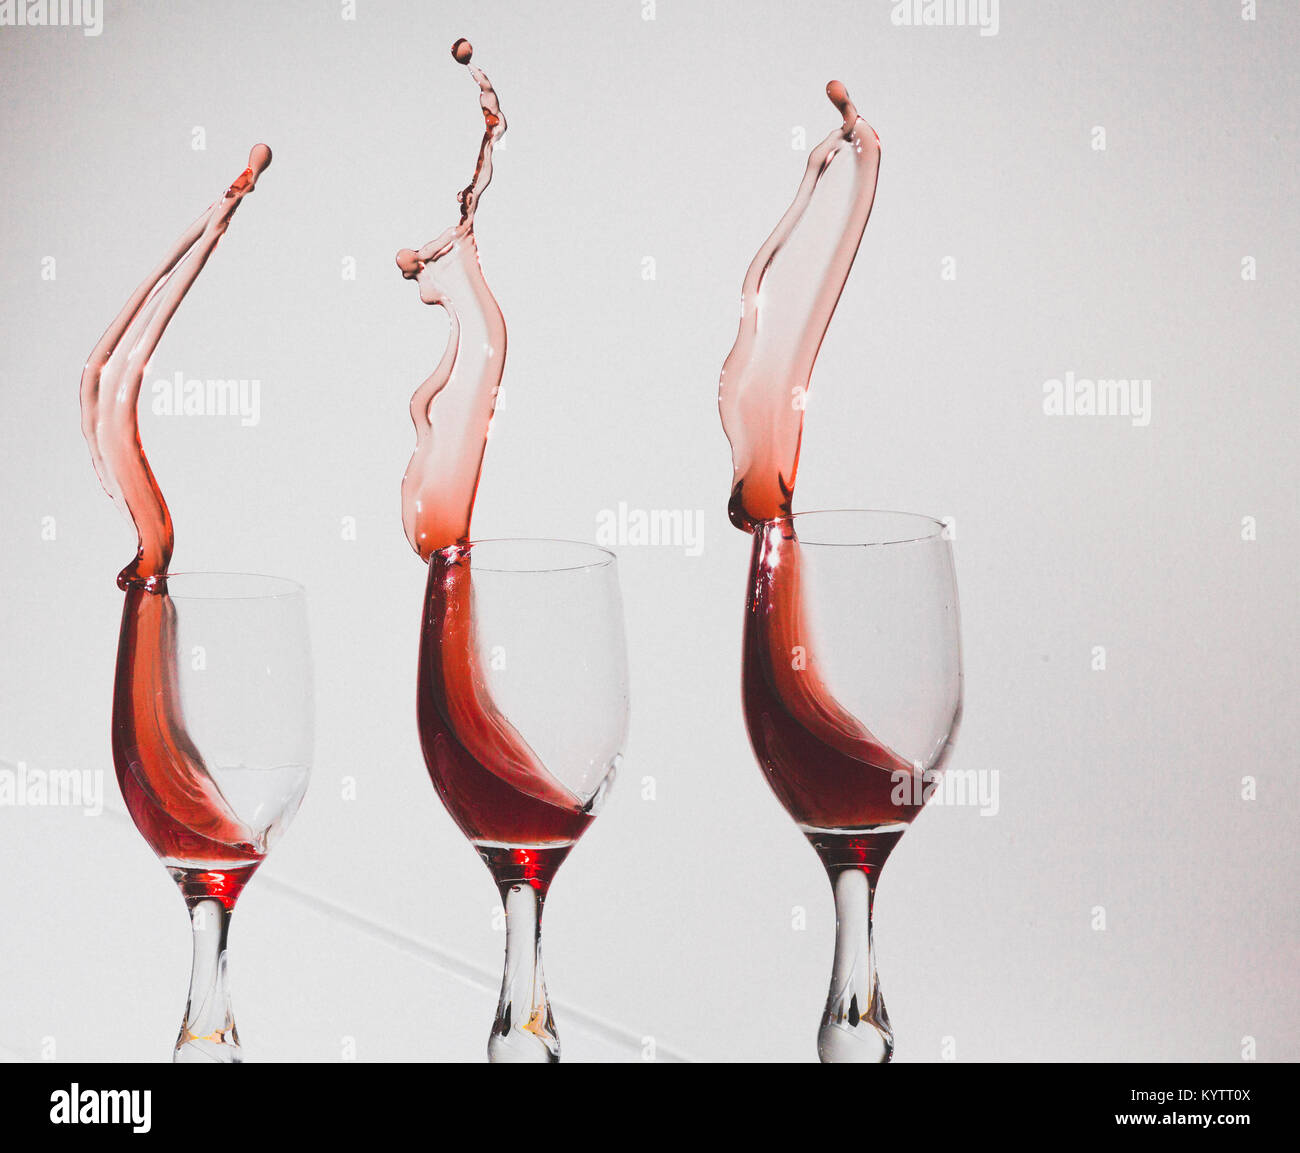 Graphic image of wine sloshing from a wine glasses.  January 2018 Stock Photo